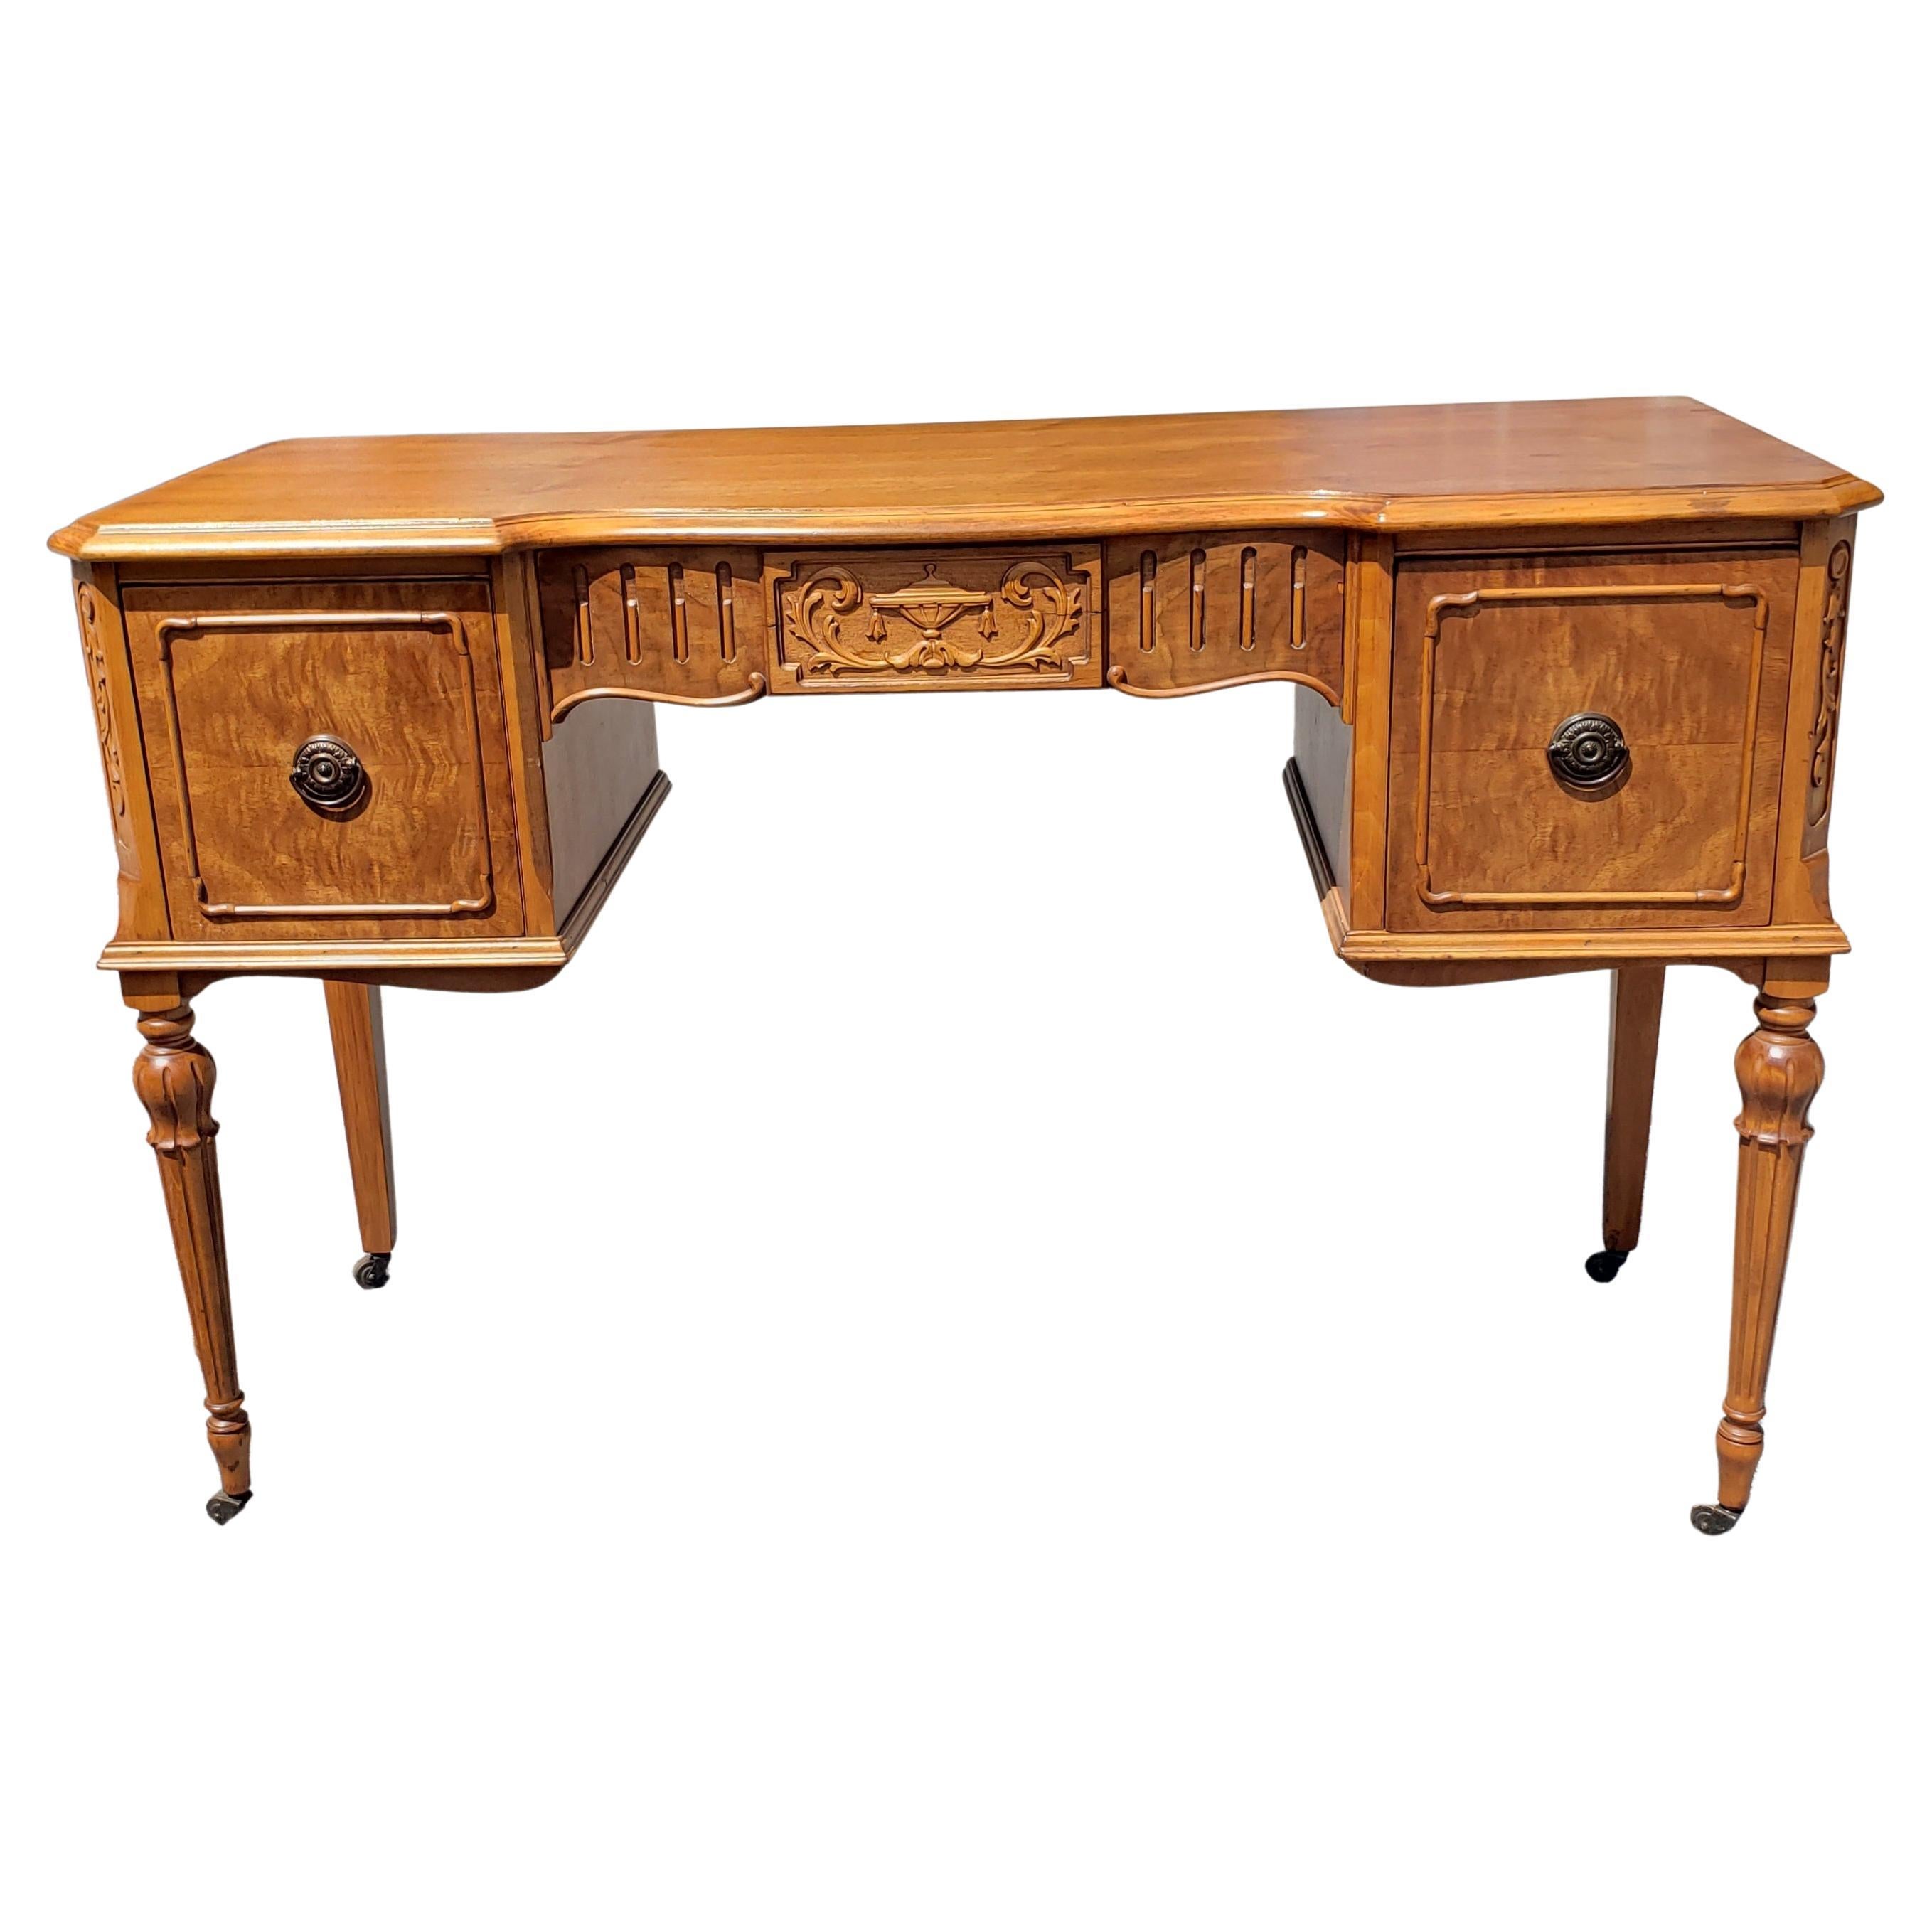 Beautiful George III vanity or dressing table with 3 drawers with dovetail construction.
Measures 32